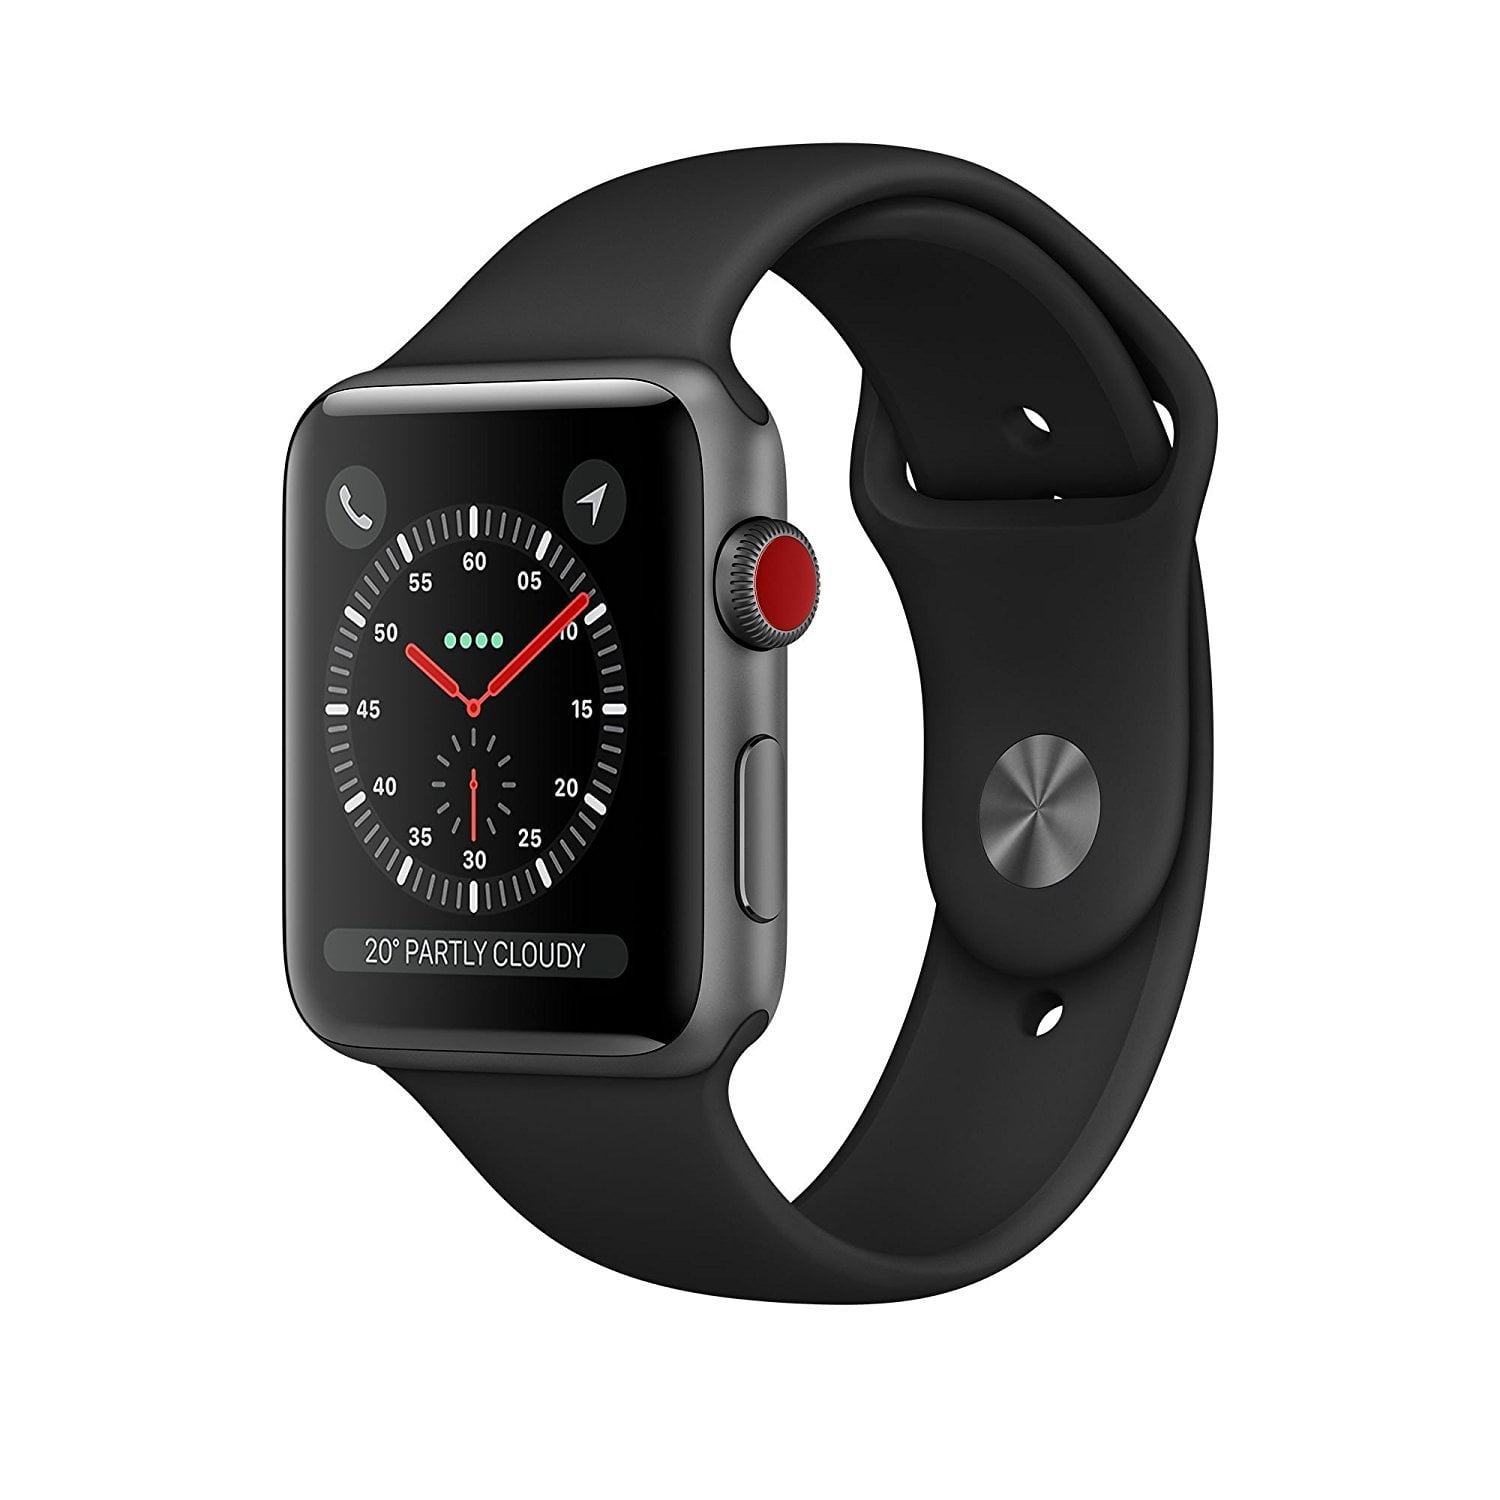 Used (Good Condition) Apple Watch 42mm Series 3 GPS + Cellular Sport Band - Walmart.com